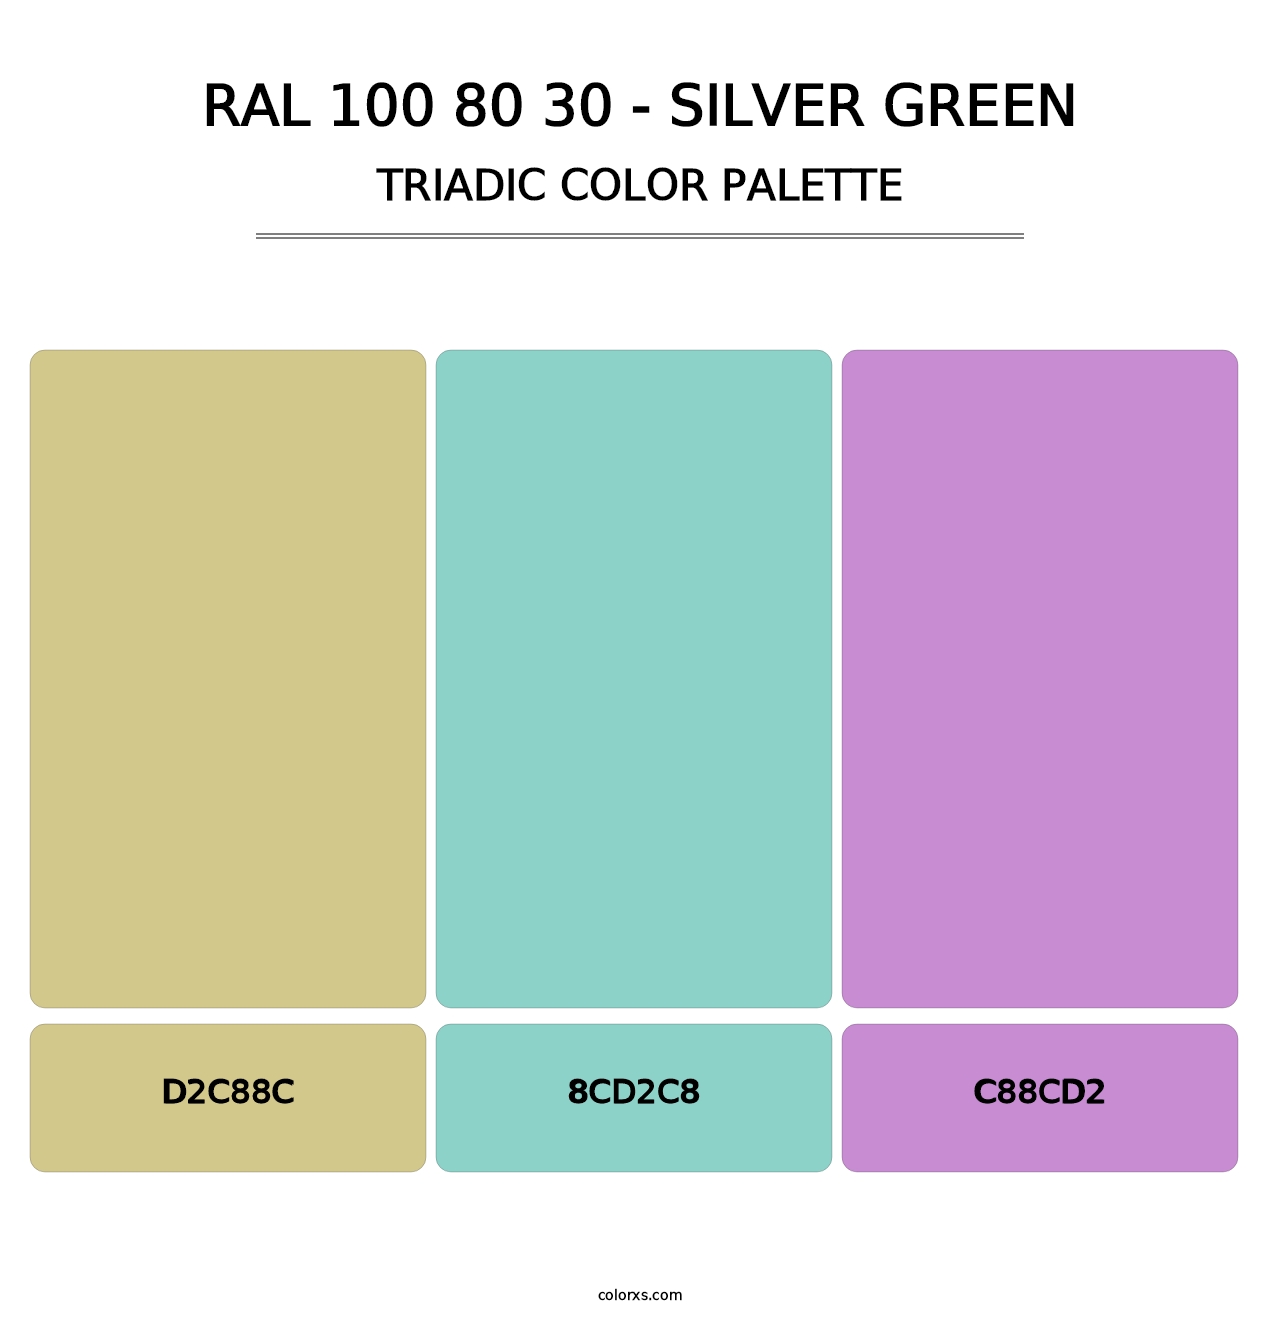 RAL 100 80 30 - Silver Green - Triadic Color Palette